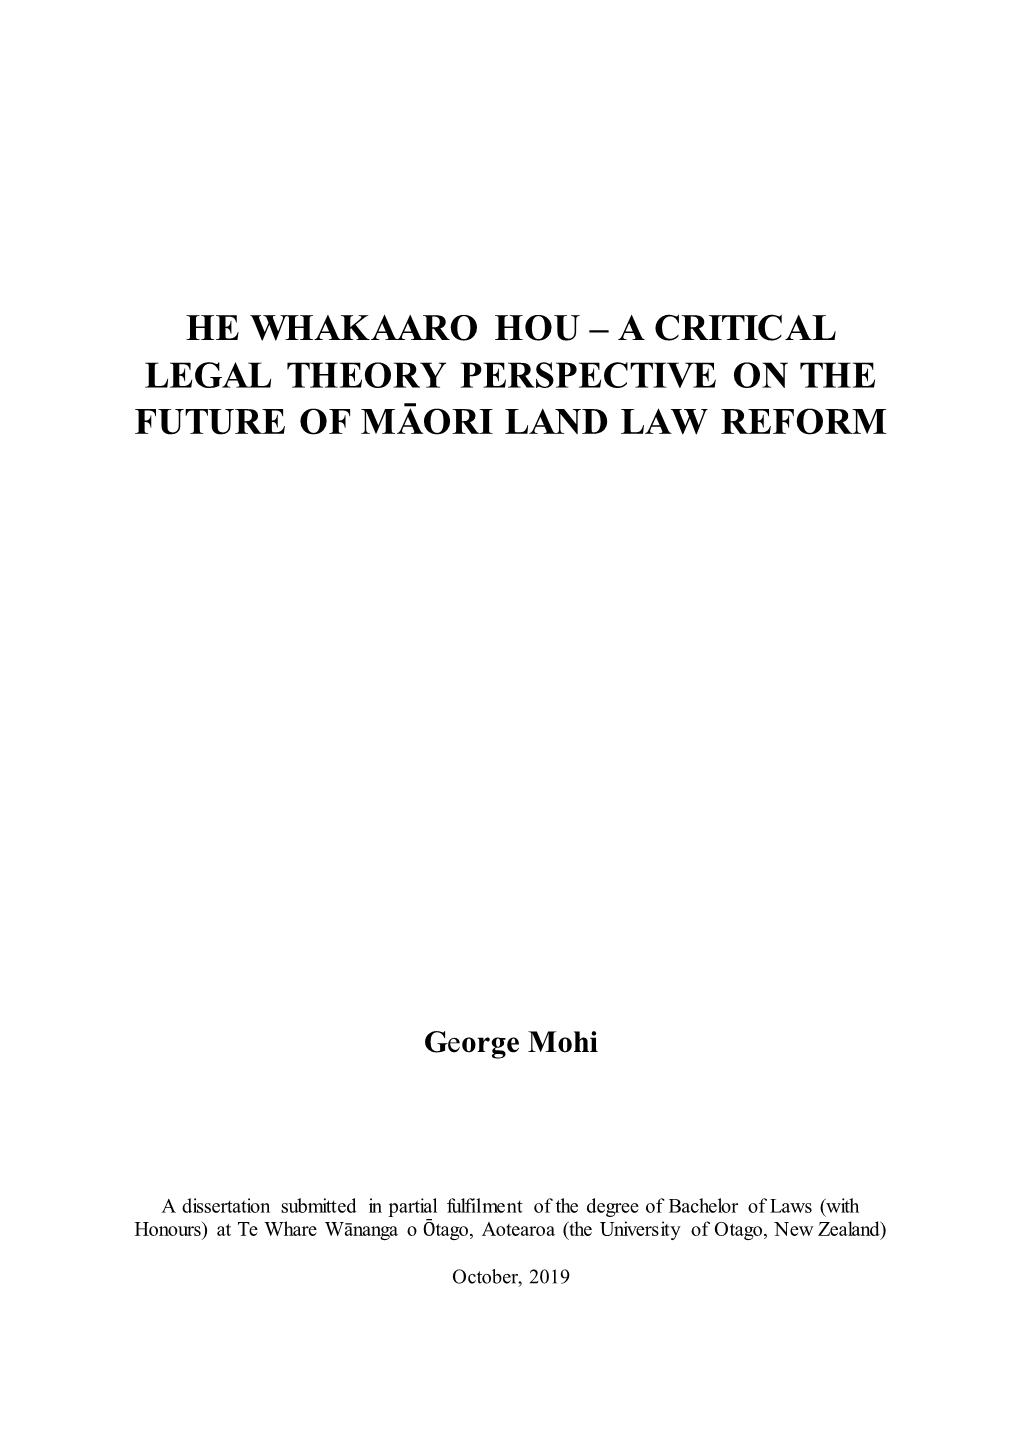 A Critical Legal Theory Perspective on the Future of Māori Land Law Reform